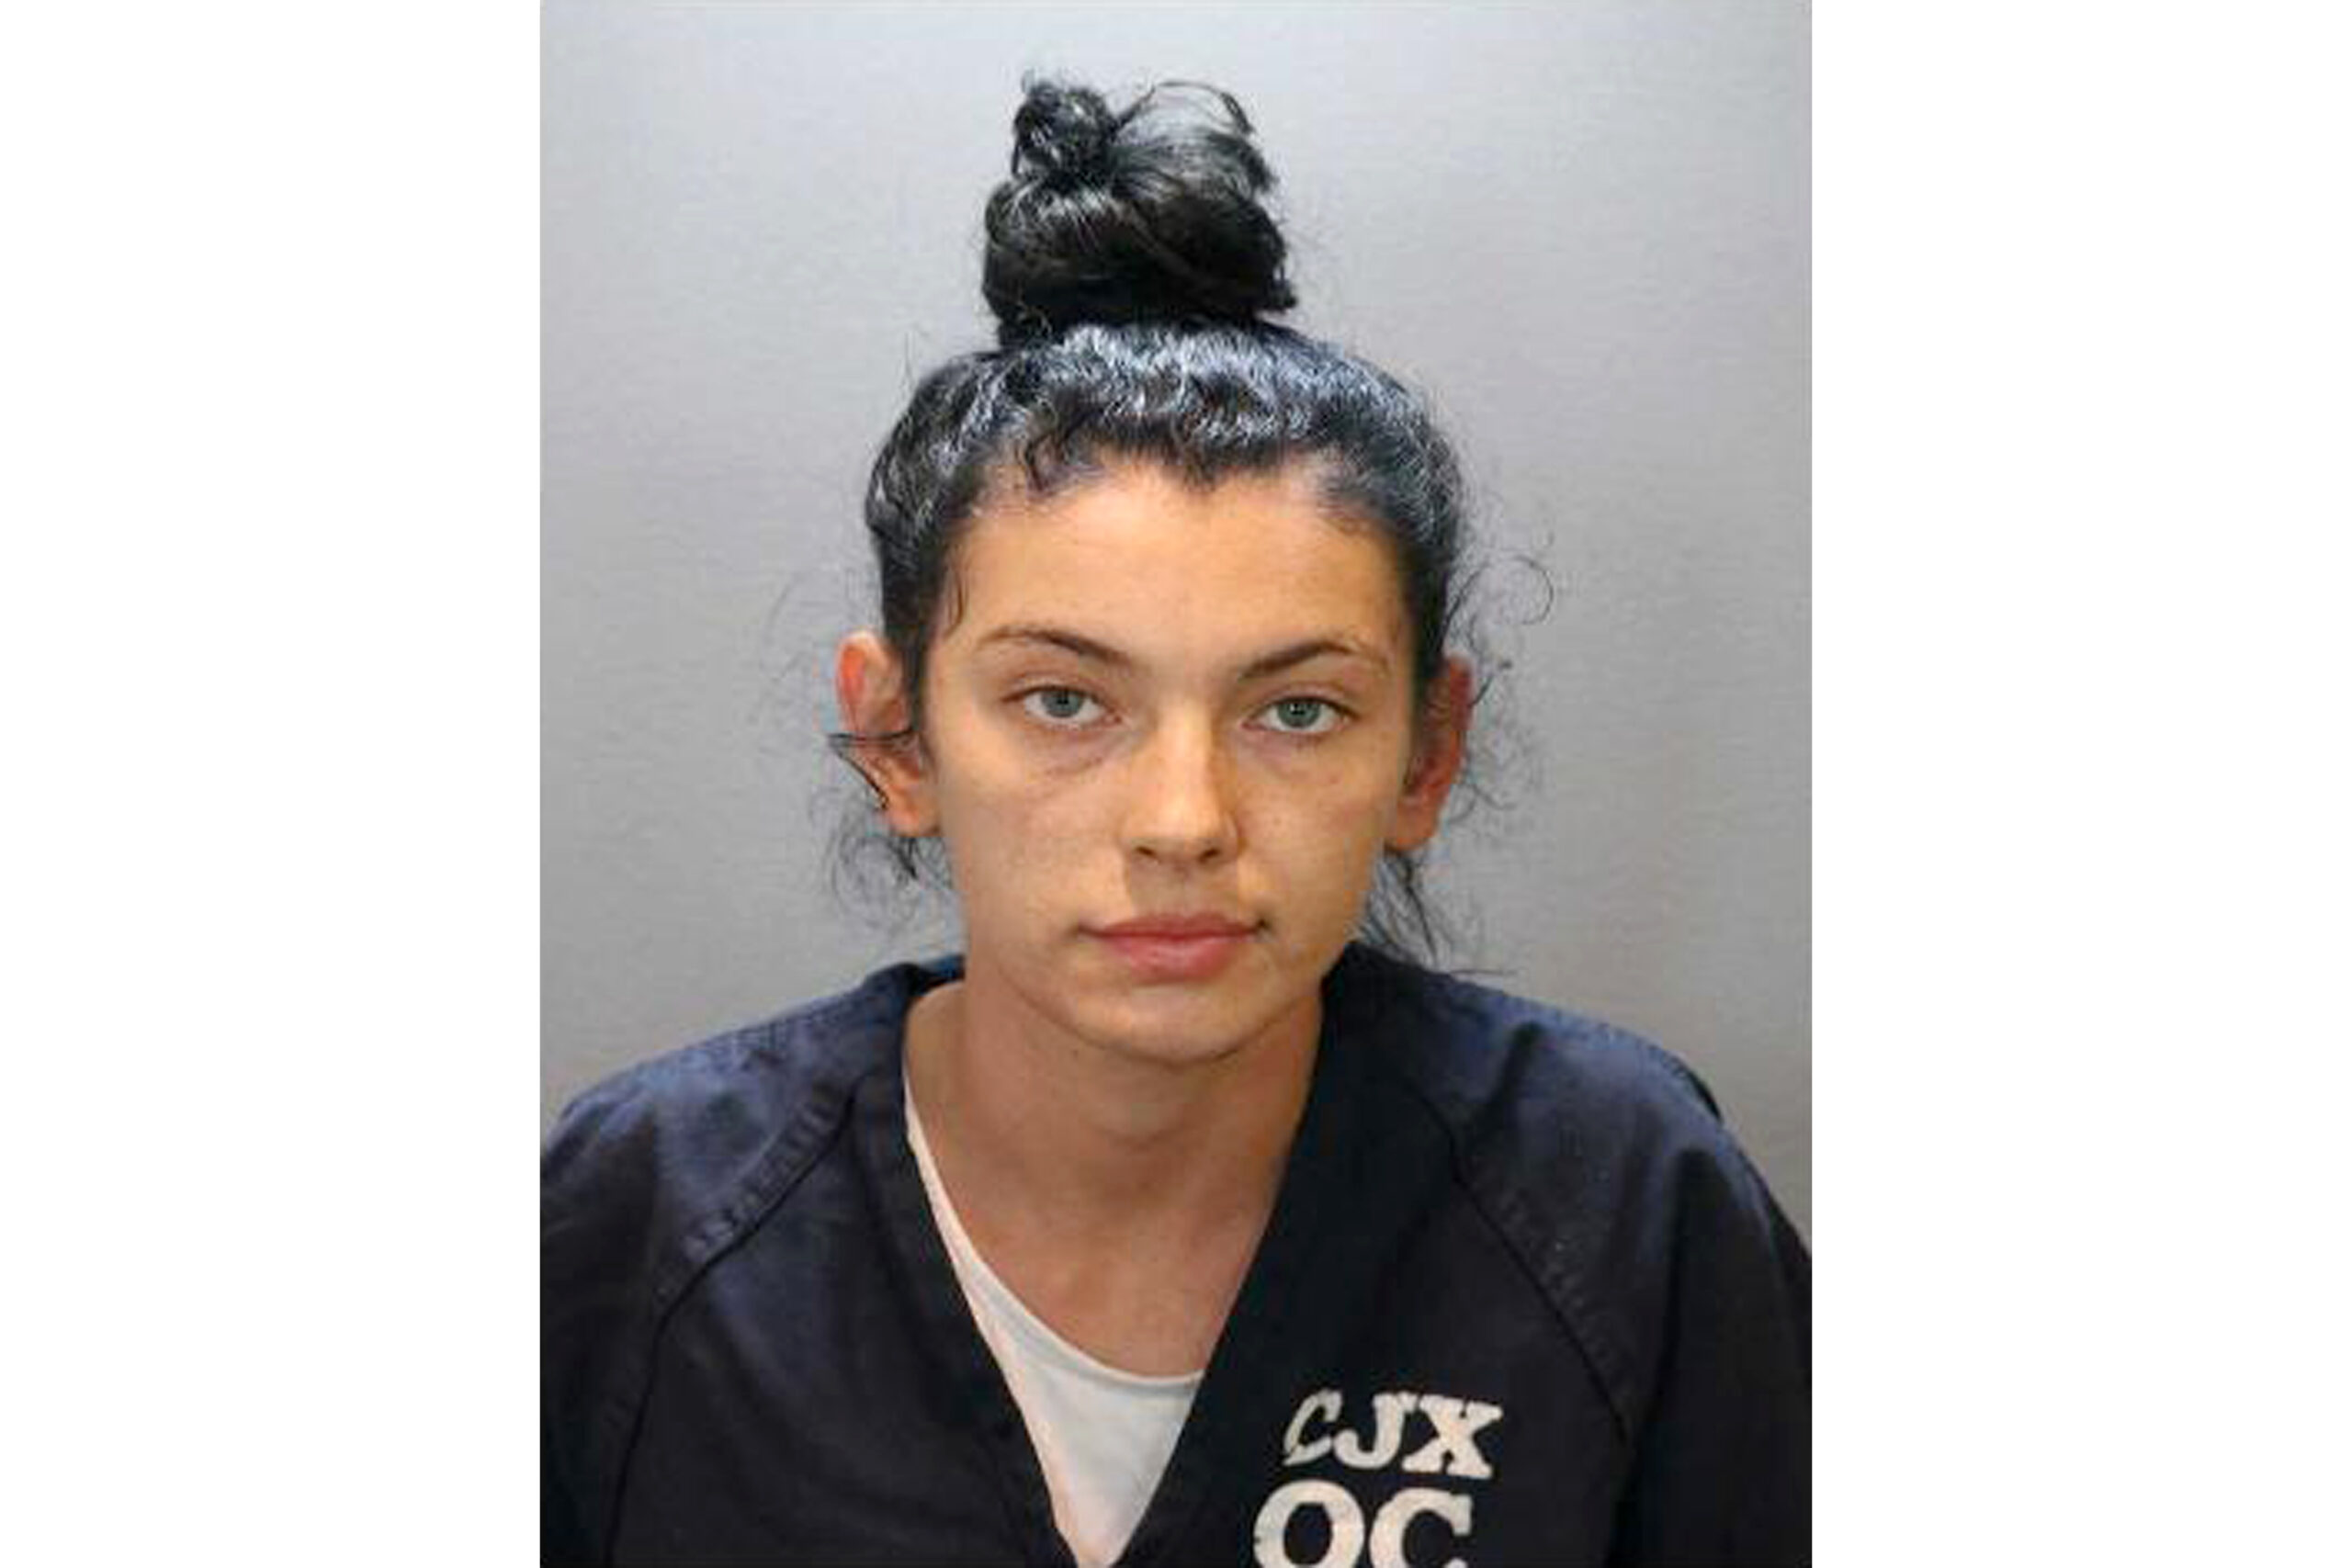 This image released by the Orange County District Attorney's Office shows Hannah Star Esser, who authorities have charged with killing a man by ramming her car into him after accusing him of trying to run over a cat in the street. Esser, 20, was charged with one count of murder in the death of 43-year-old Victor Anthony Luis and is detained on $1 million bail, the Orange County District Attorney's office said in a statement Wednesday, Sept. 28, 2022. (Orange County District Attorney's Office via AP)